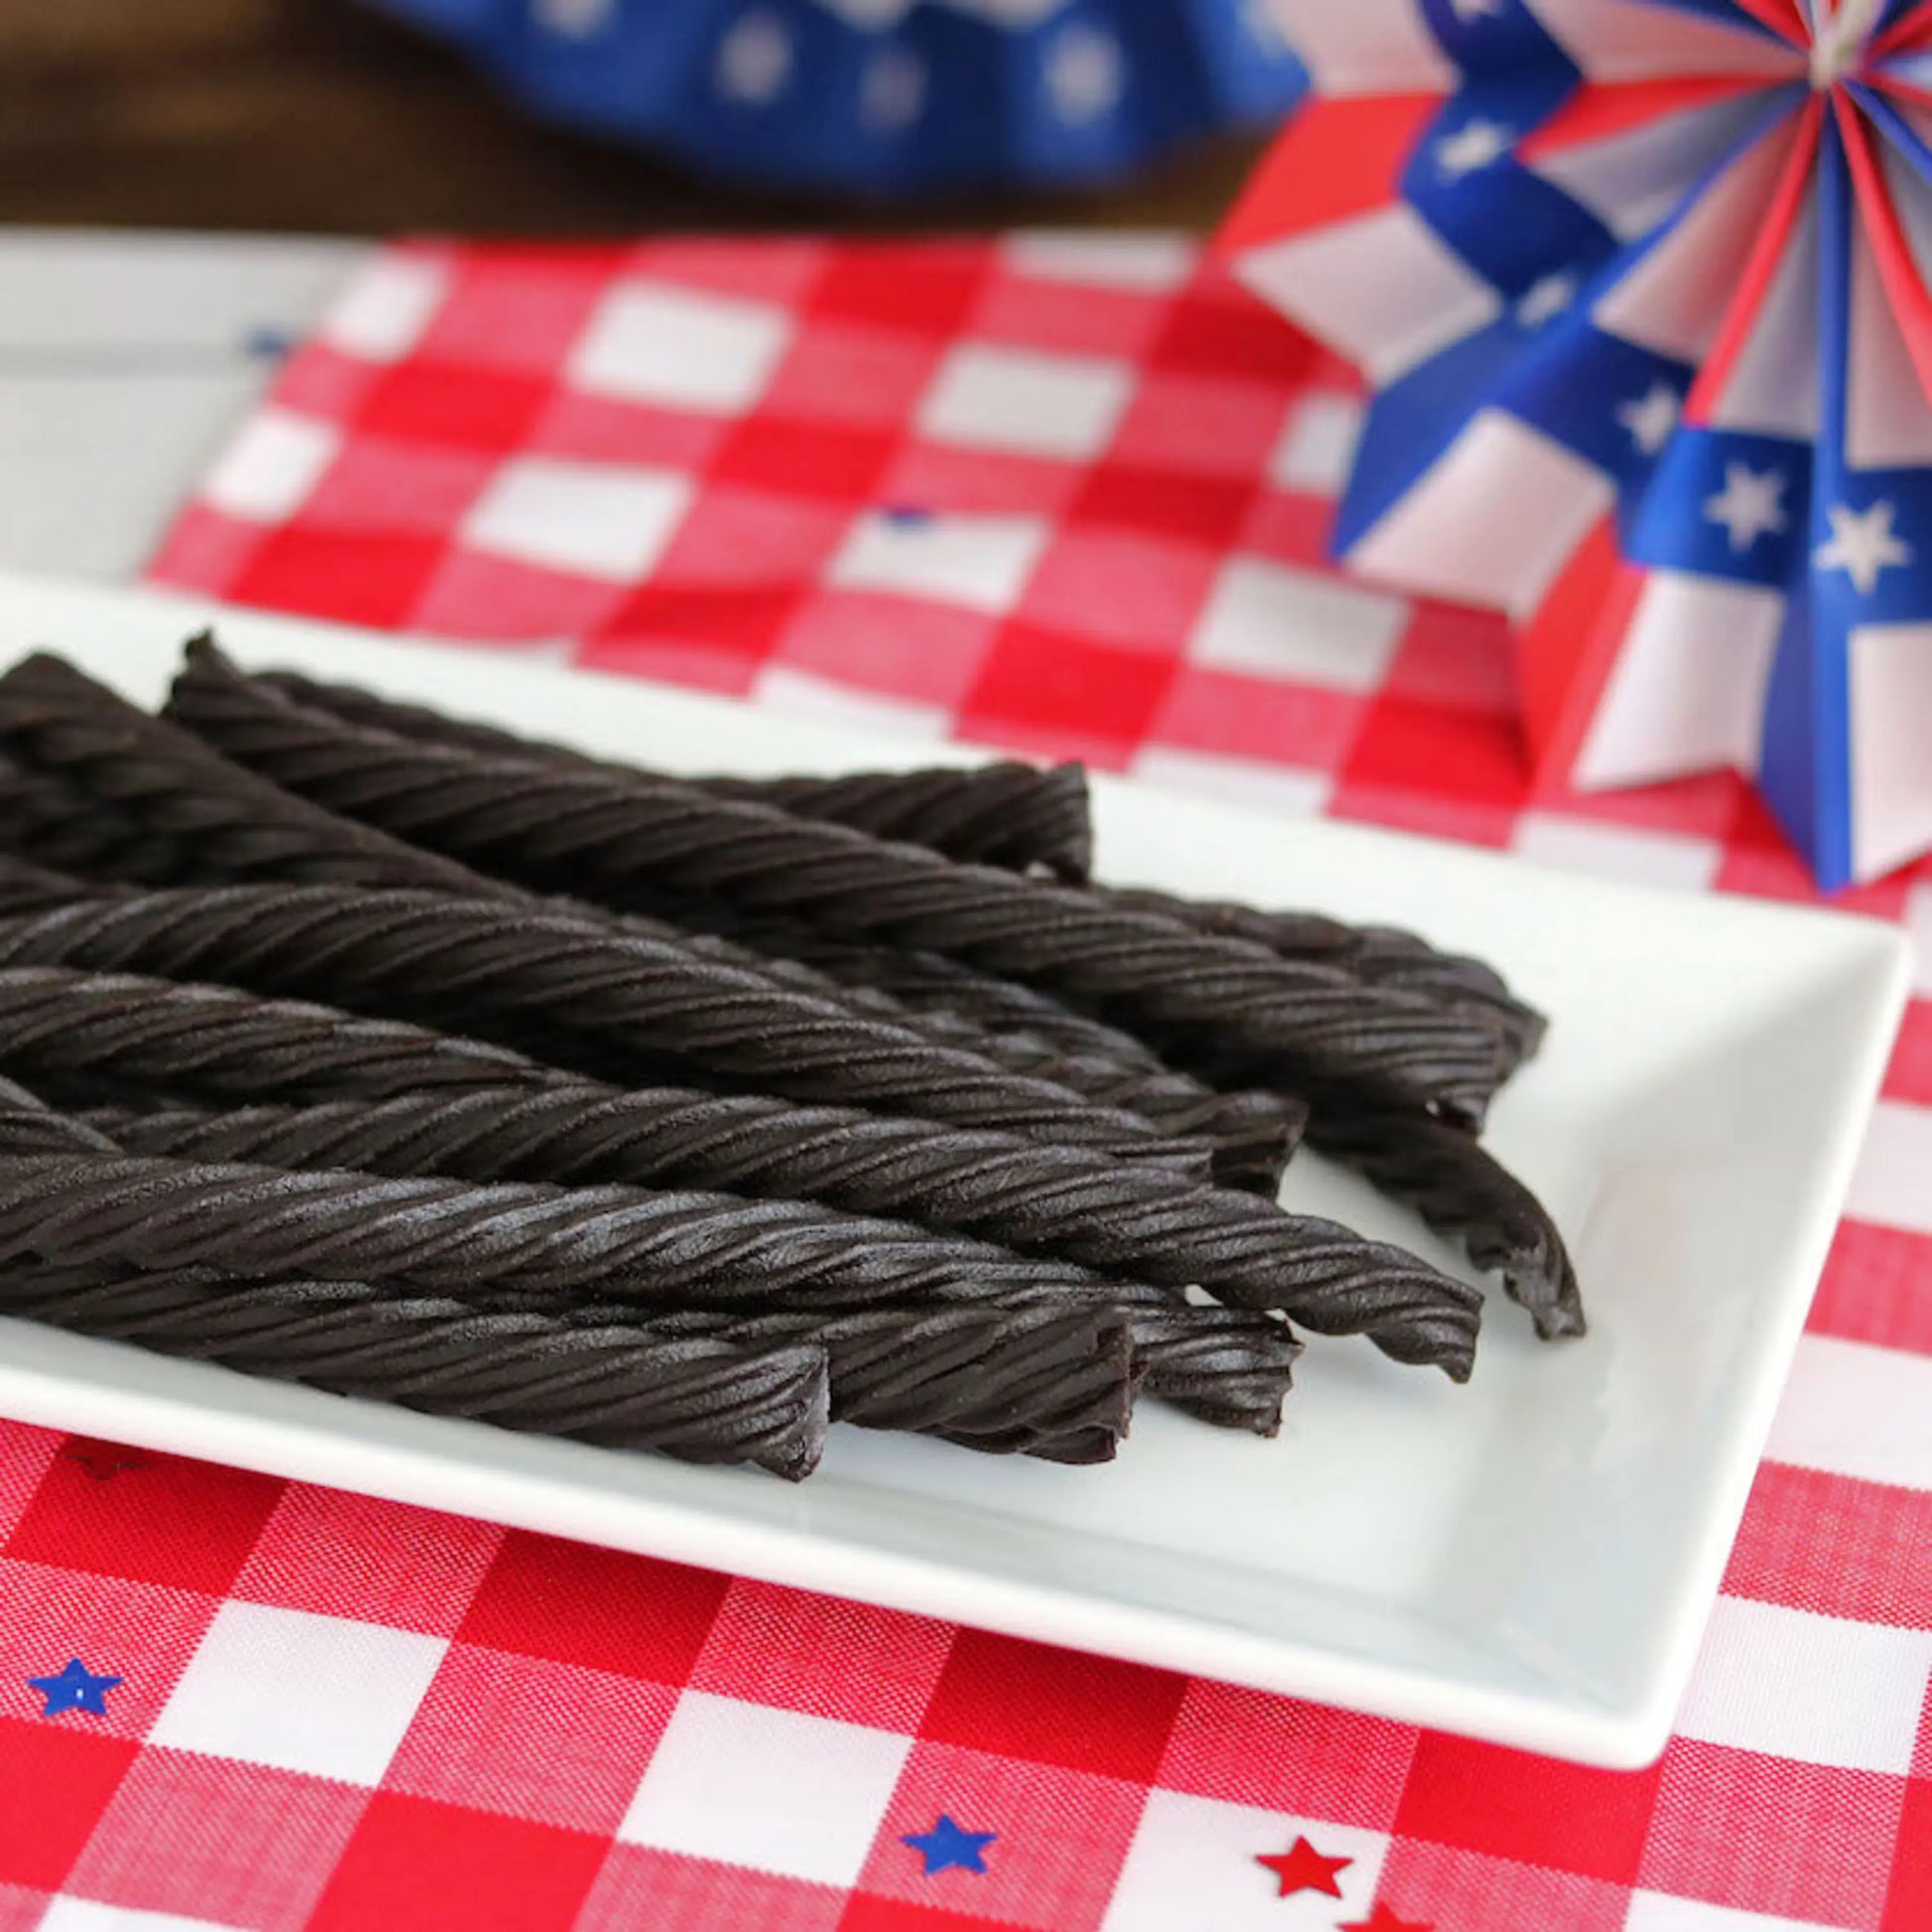 Red Vines Black Licorice Candy Twists on a picnic table with patriotic decorations